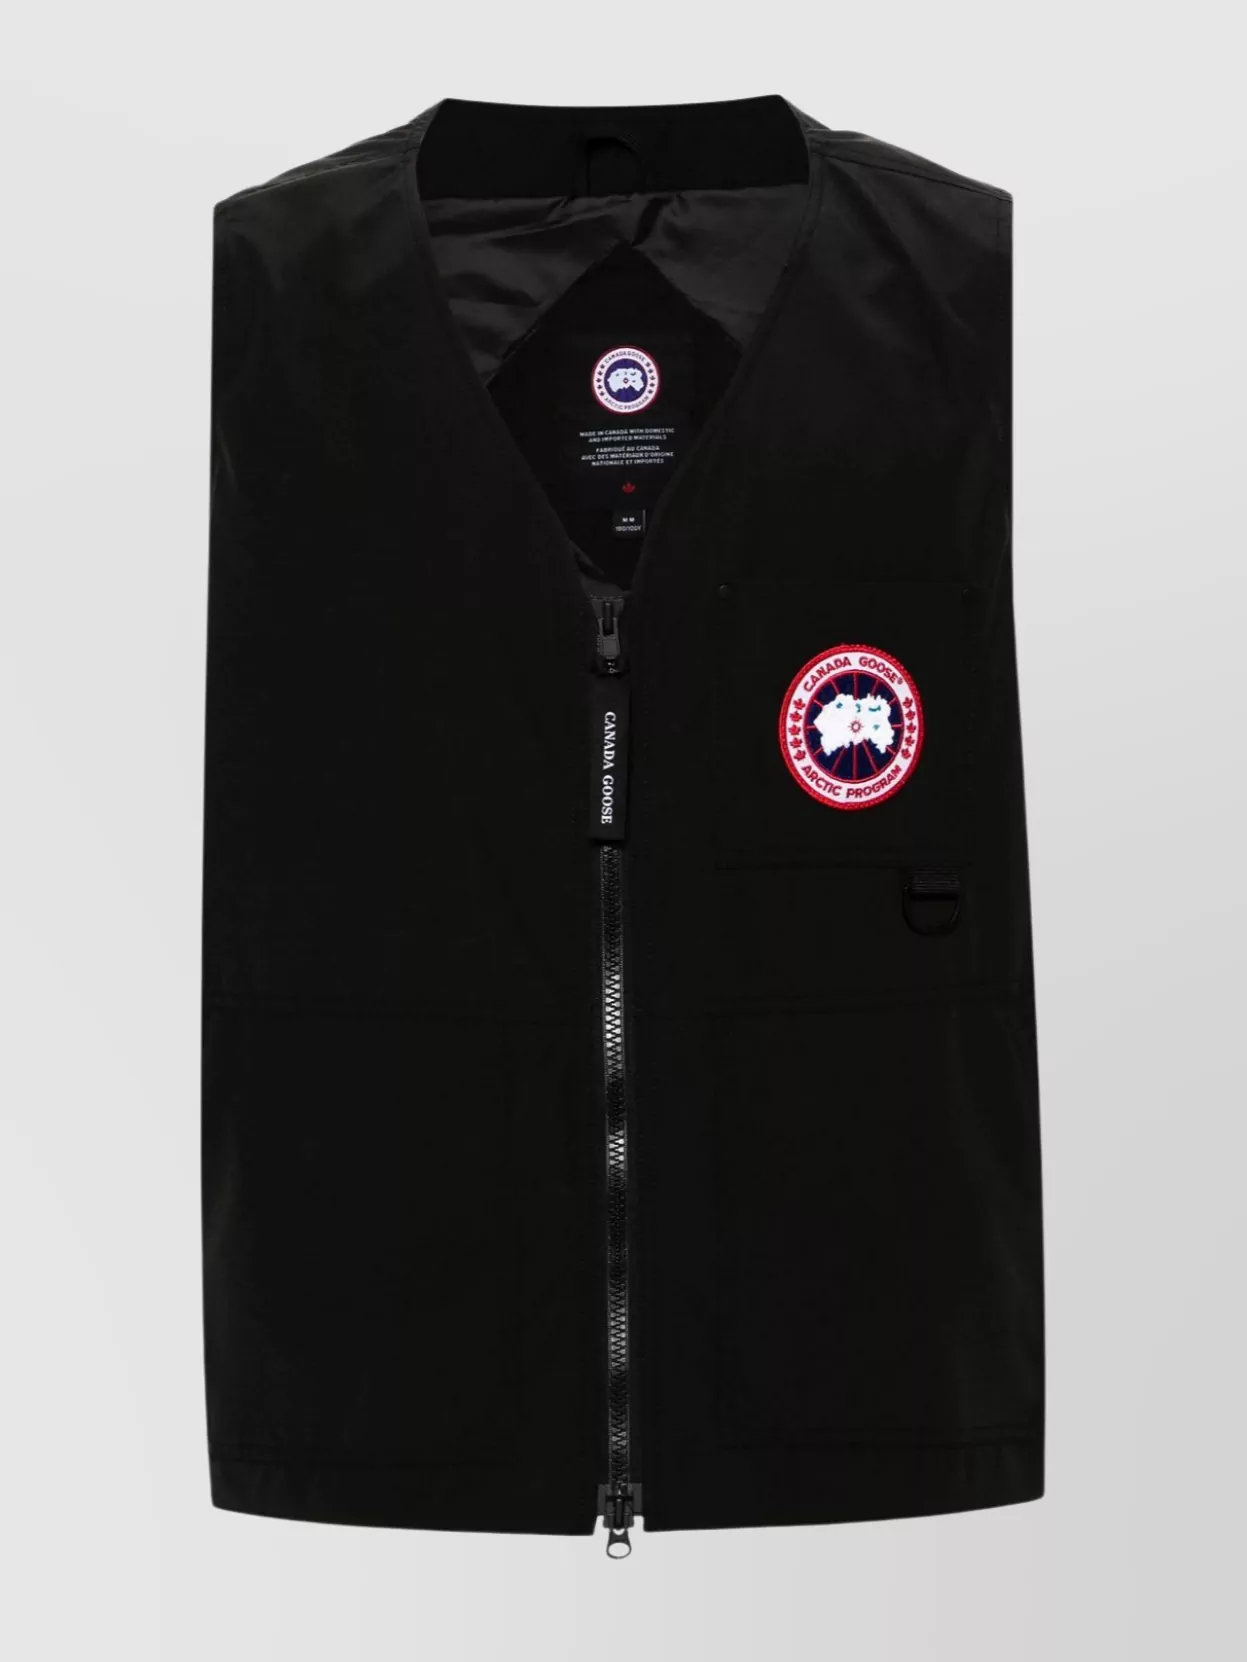 Shop Canada Goose Vest With Contrast Shoulder Panels And Reflective Accents